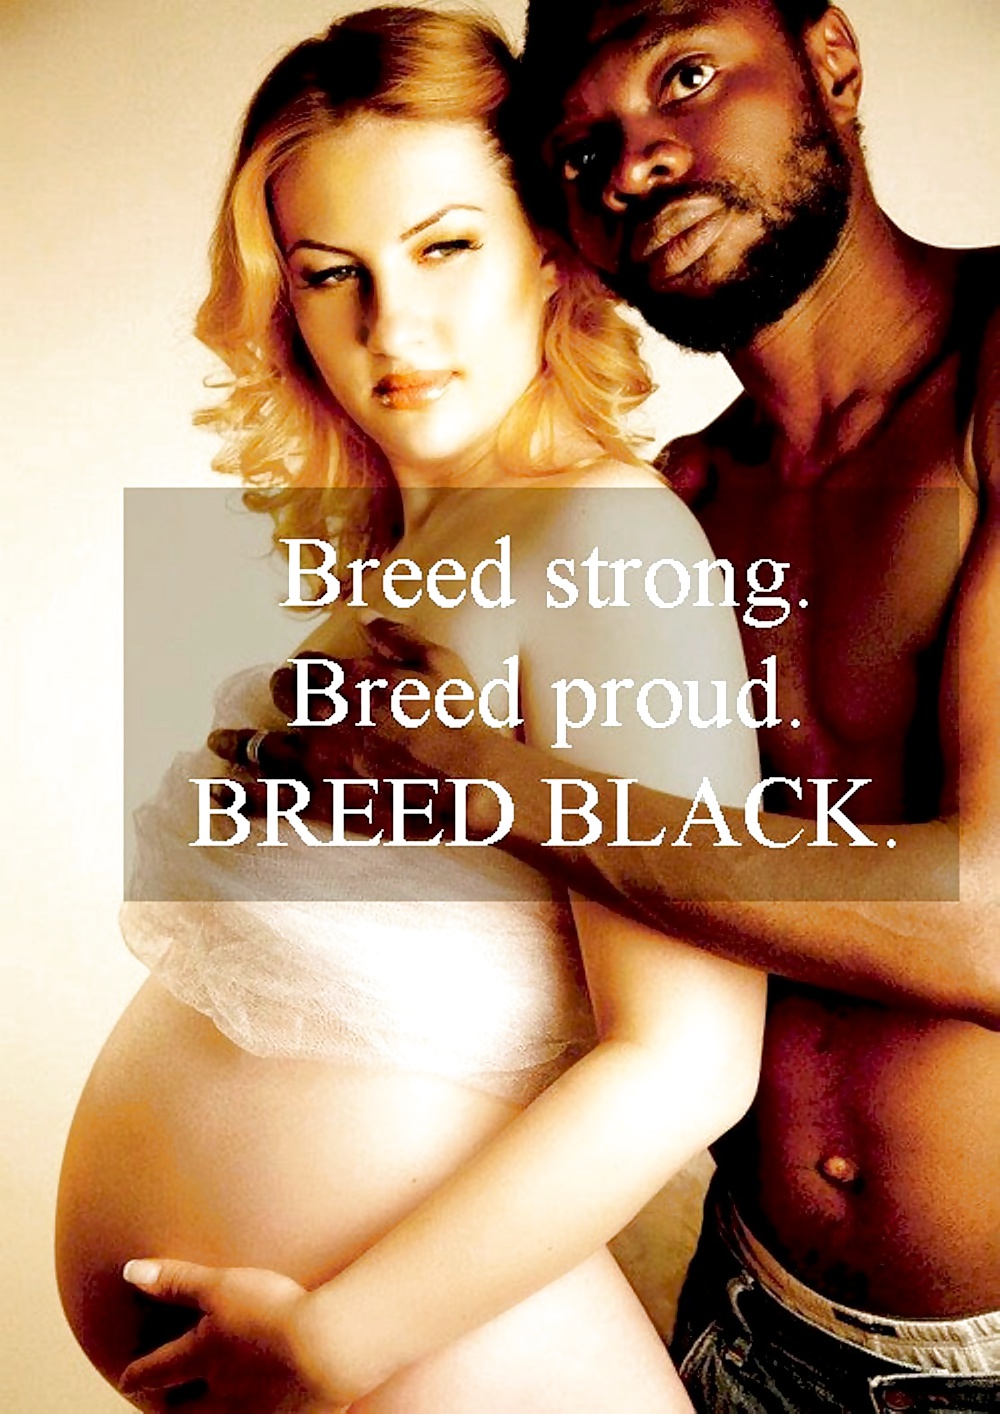 BREED STRONG. BREED PROUD. BREED BLACK. #25693041